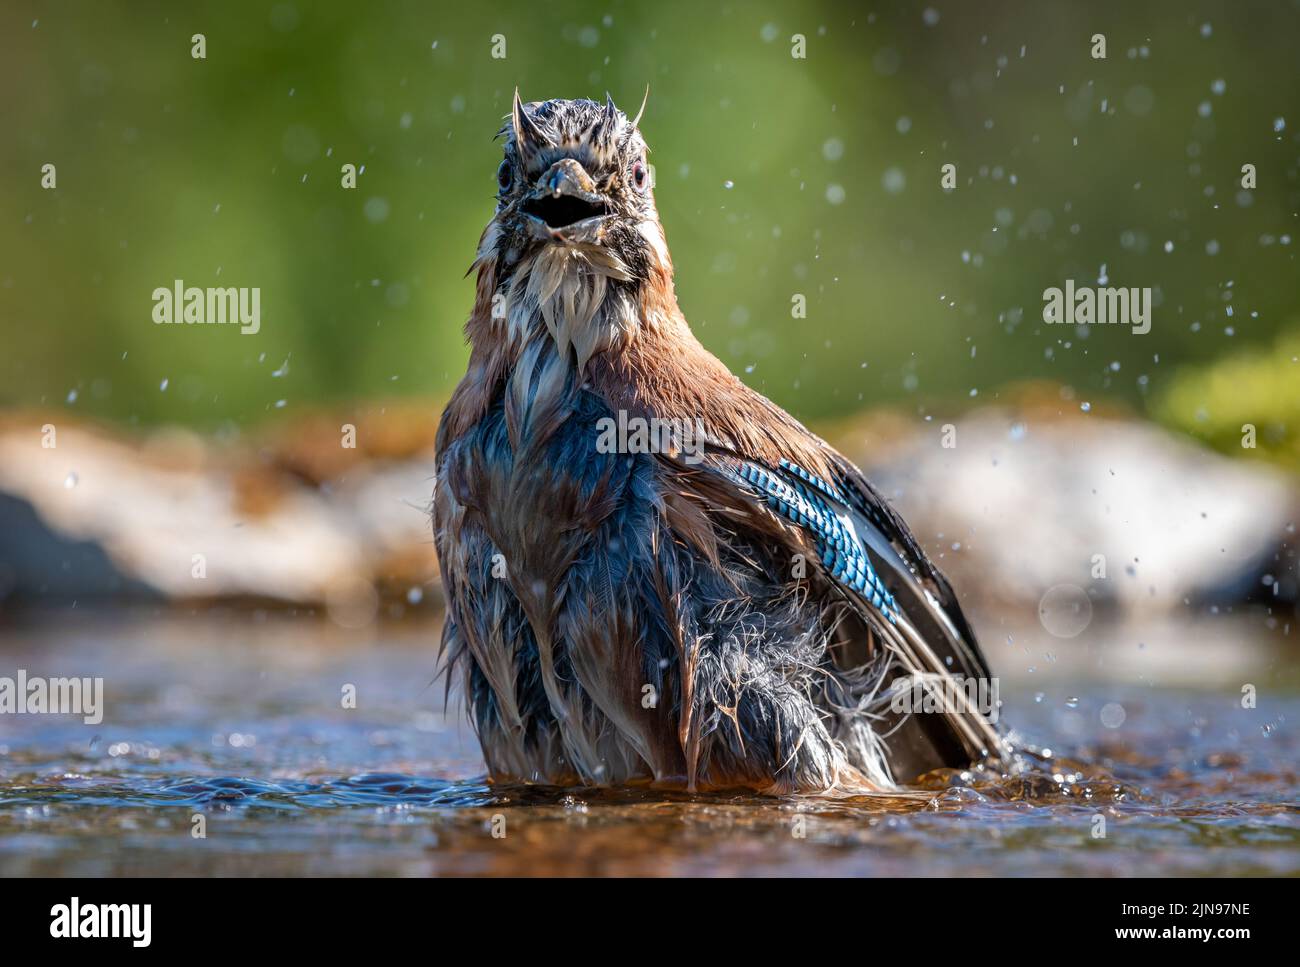 Jay Bird Corvid have a bath / washing in a reflection pool Stock Photo